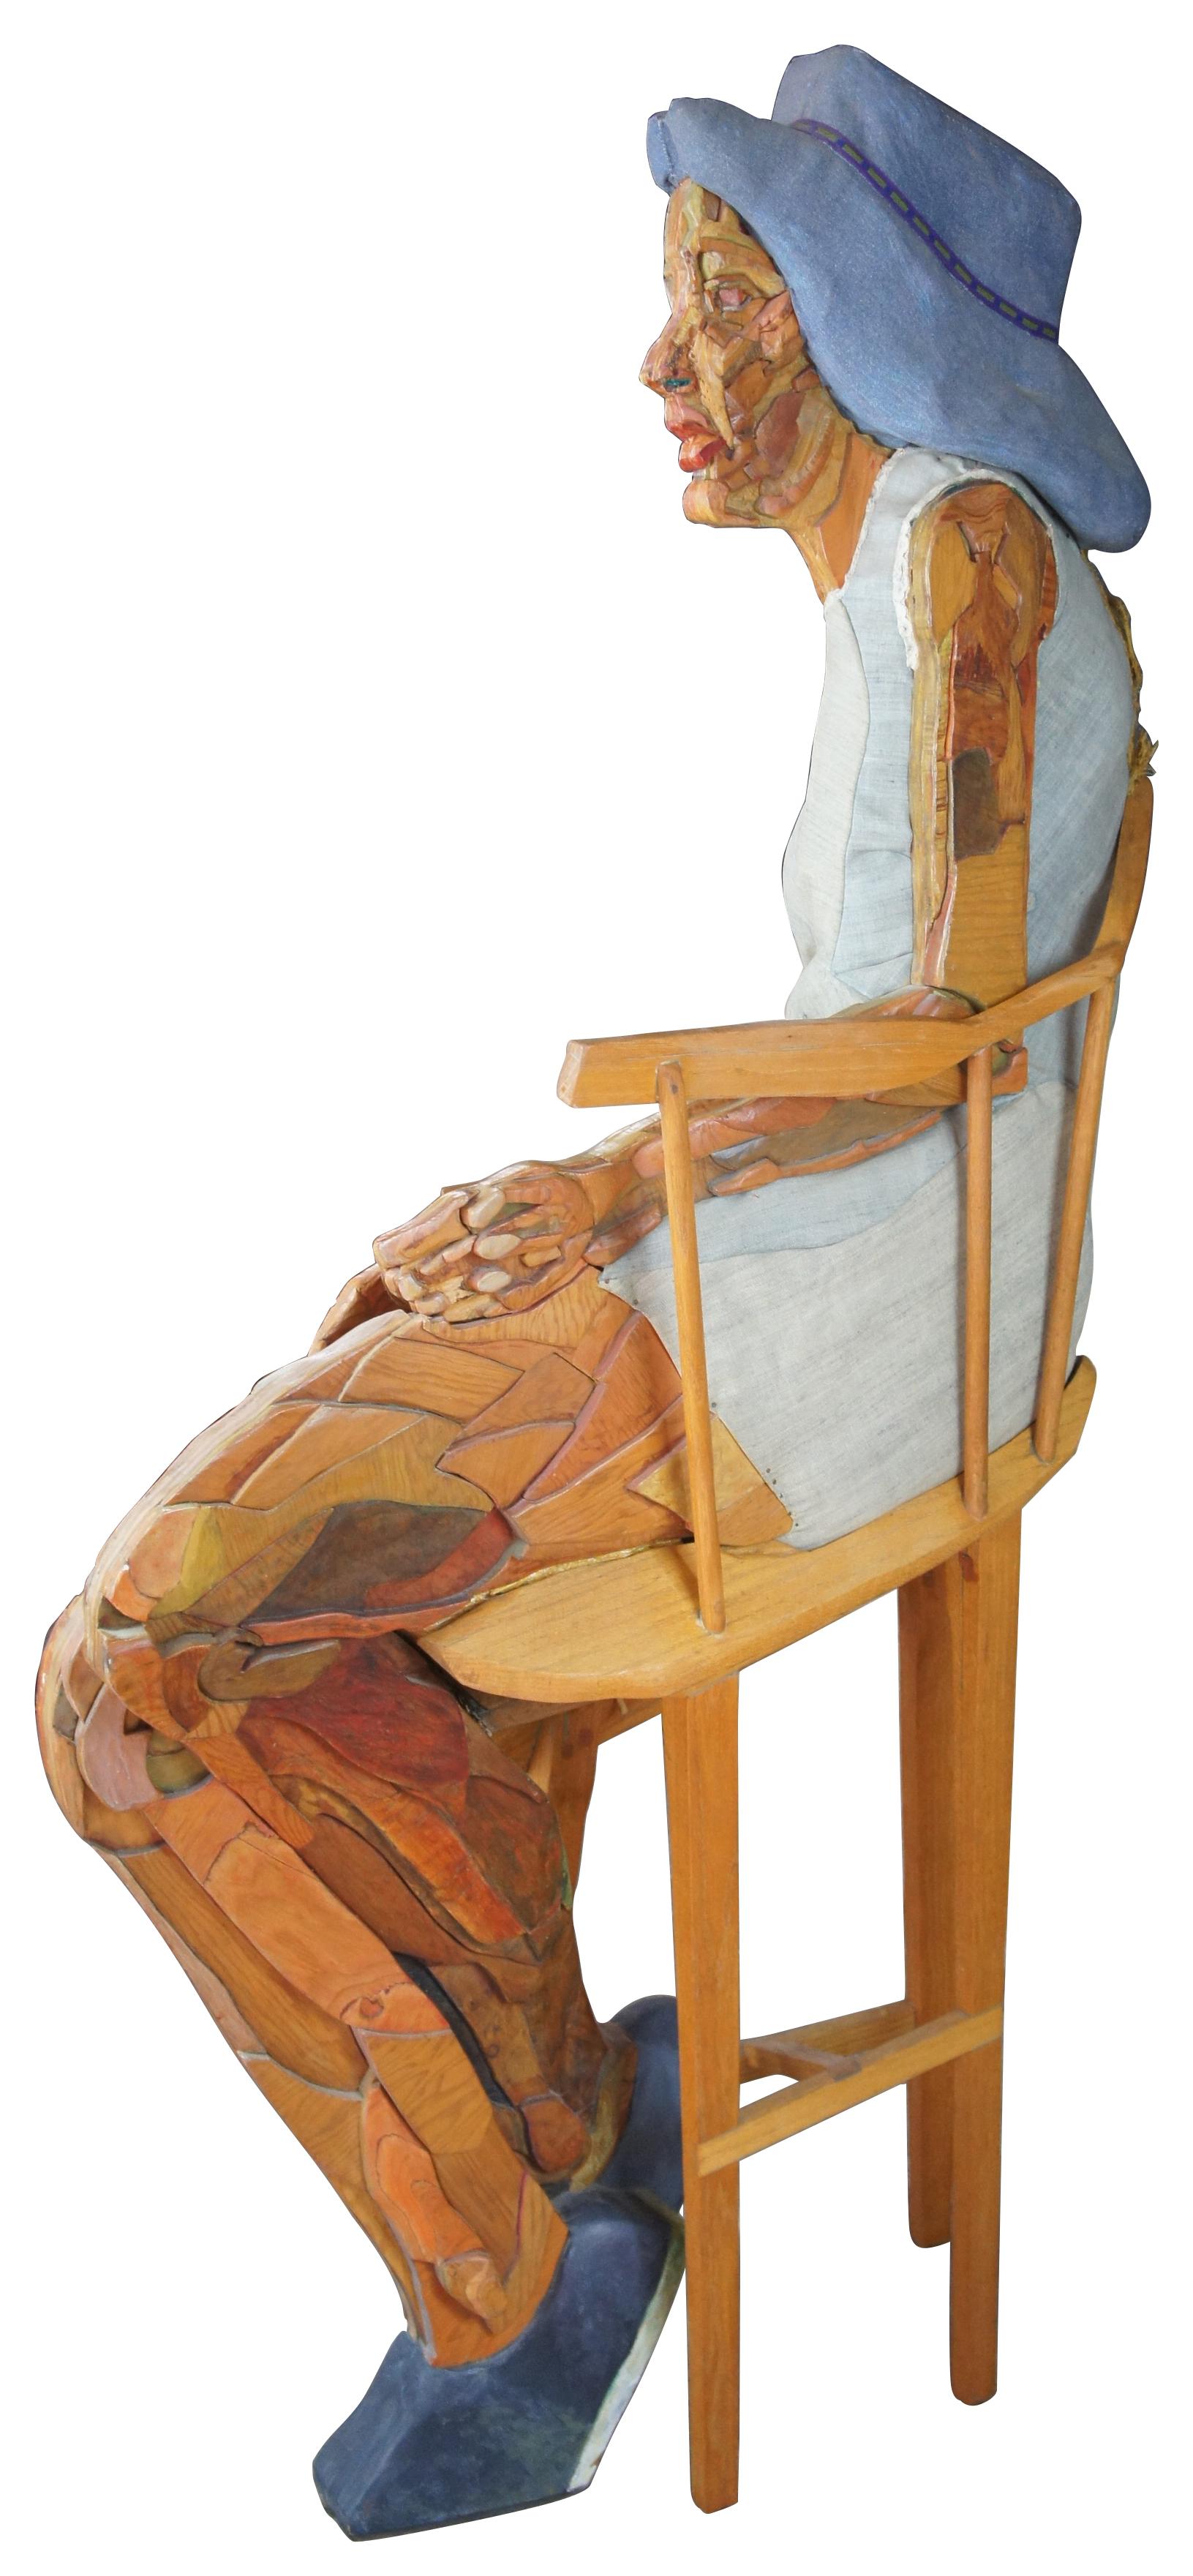 Gail by Thomas Giebink larger than life wood art sculpture figure woman in chair

